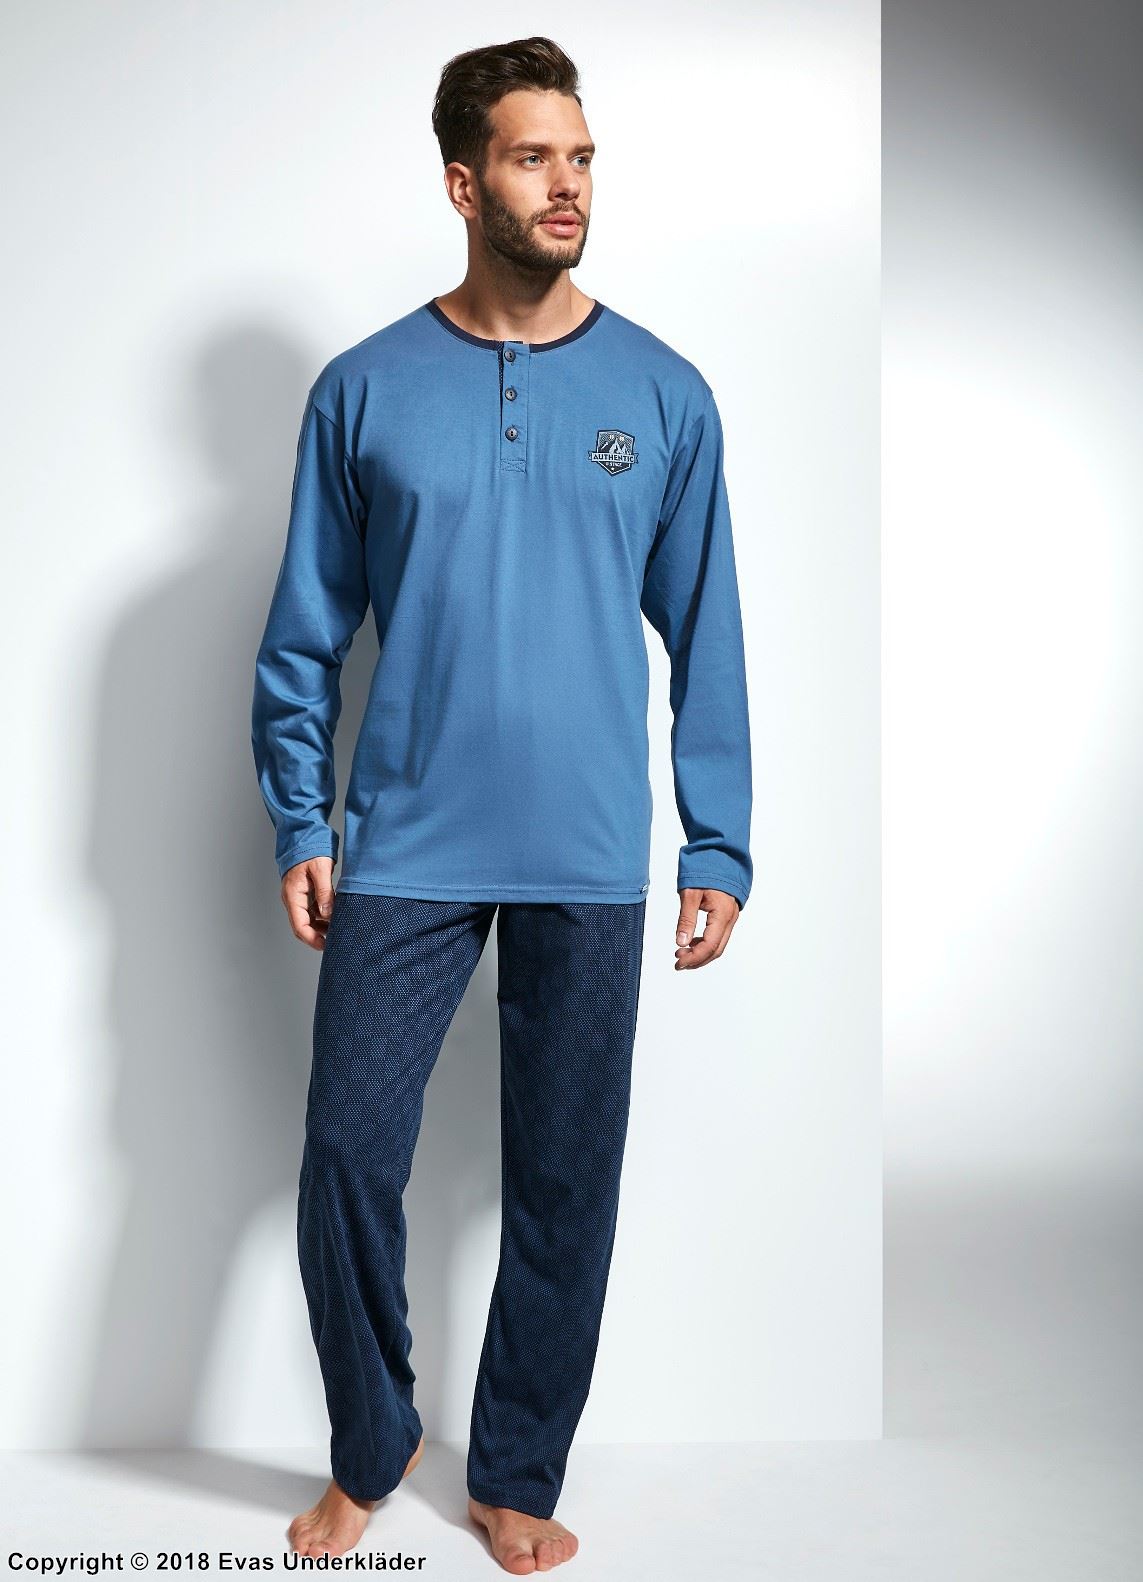 Men's top and pants pajamas, long sleeves, buttons